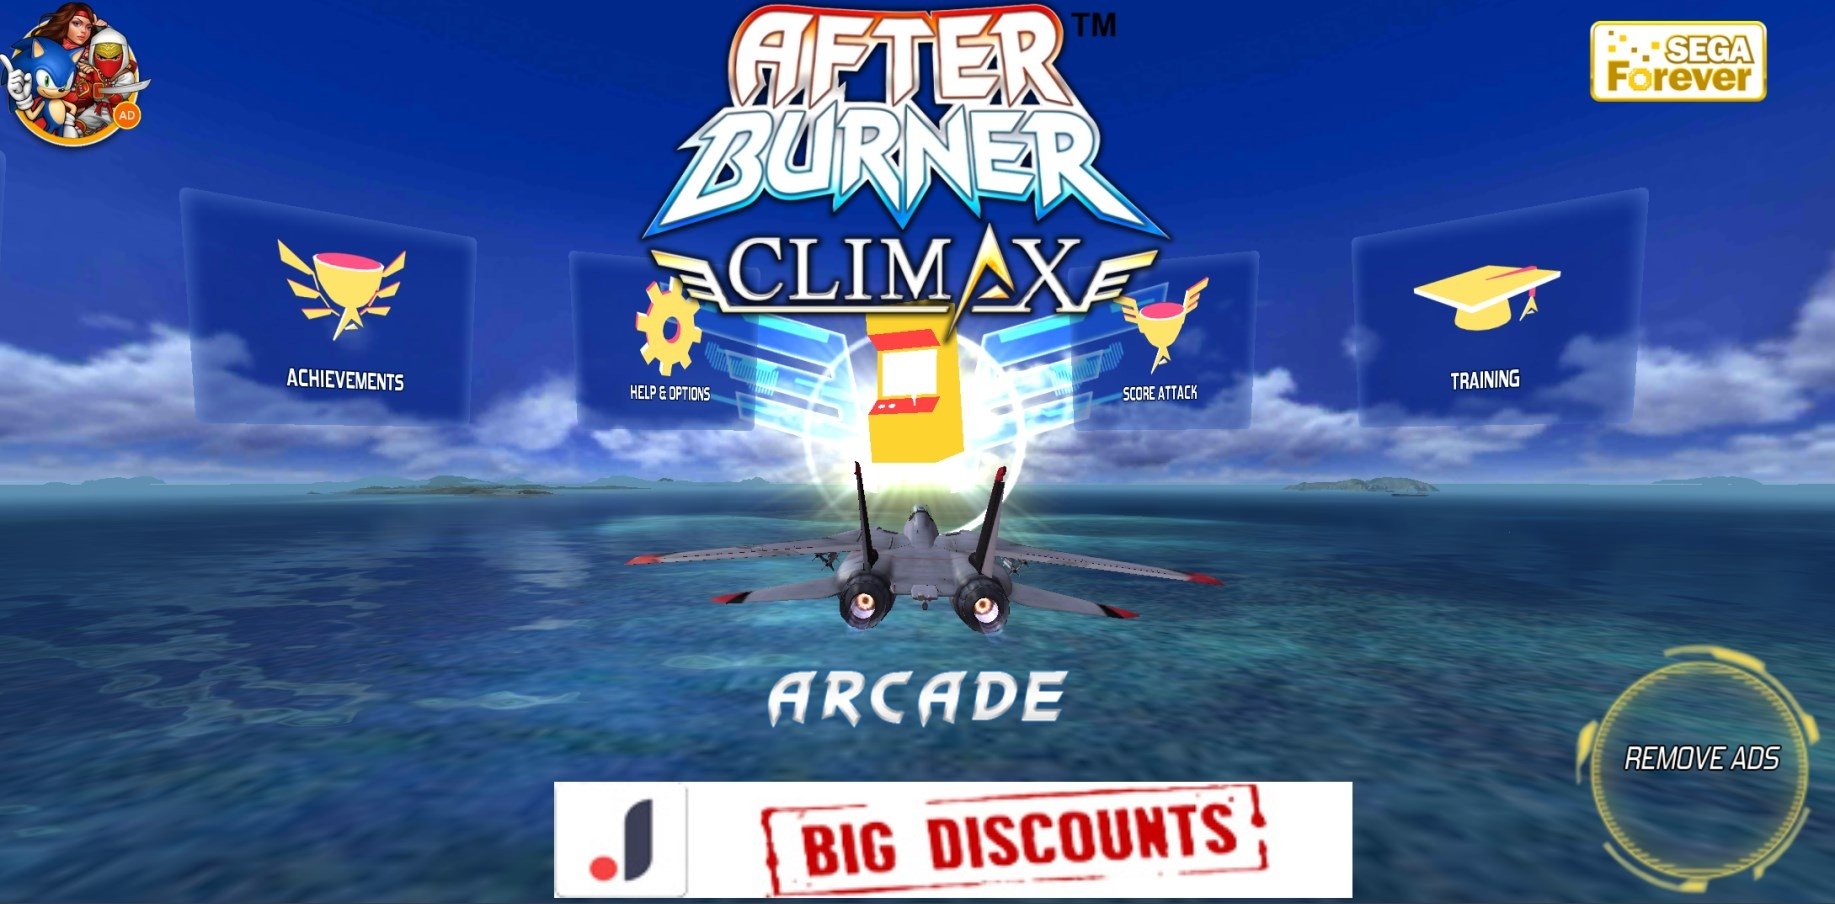 video game company with afterburner